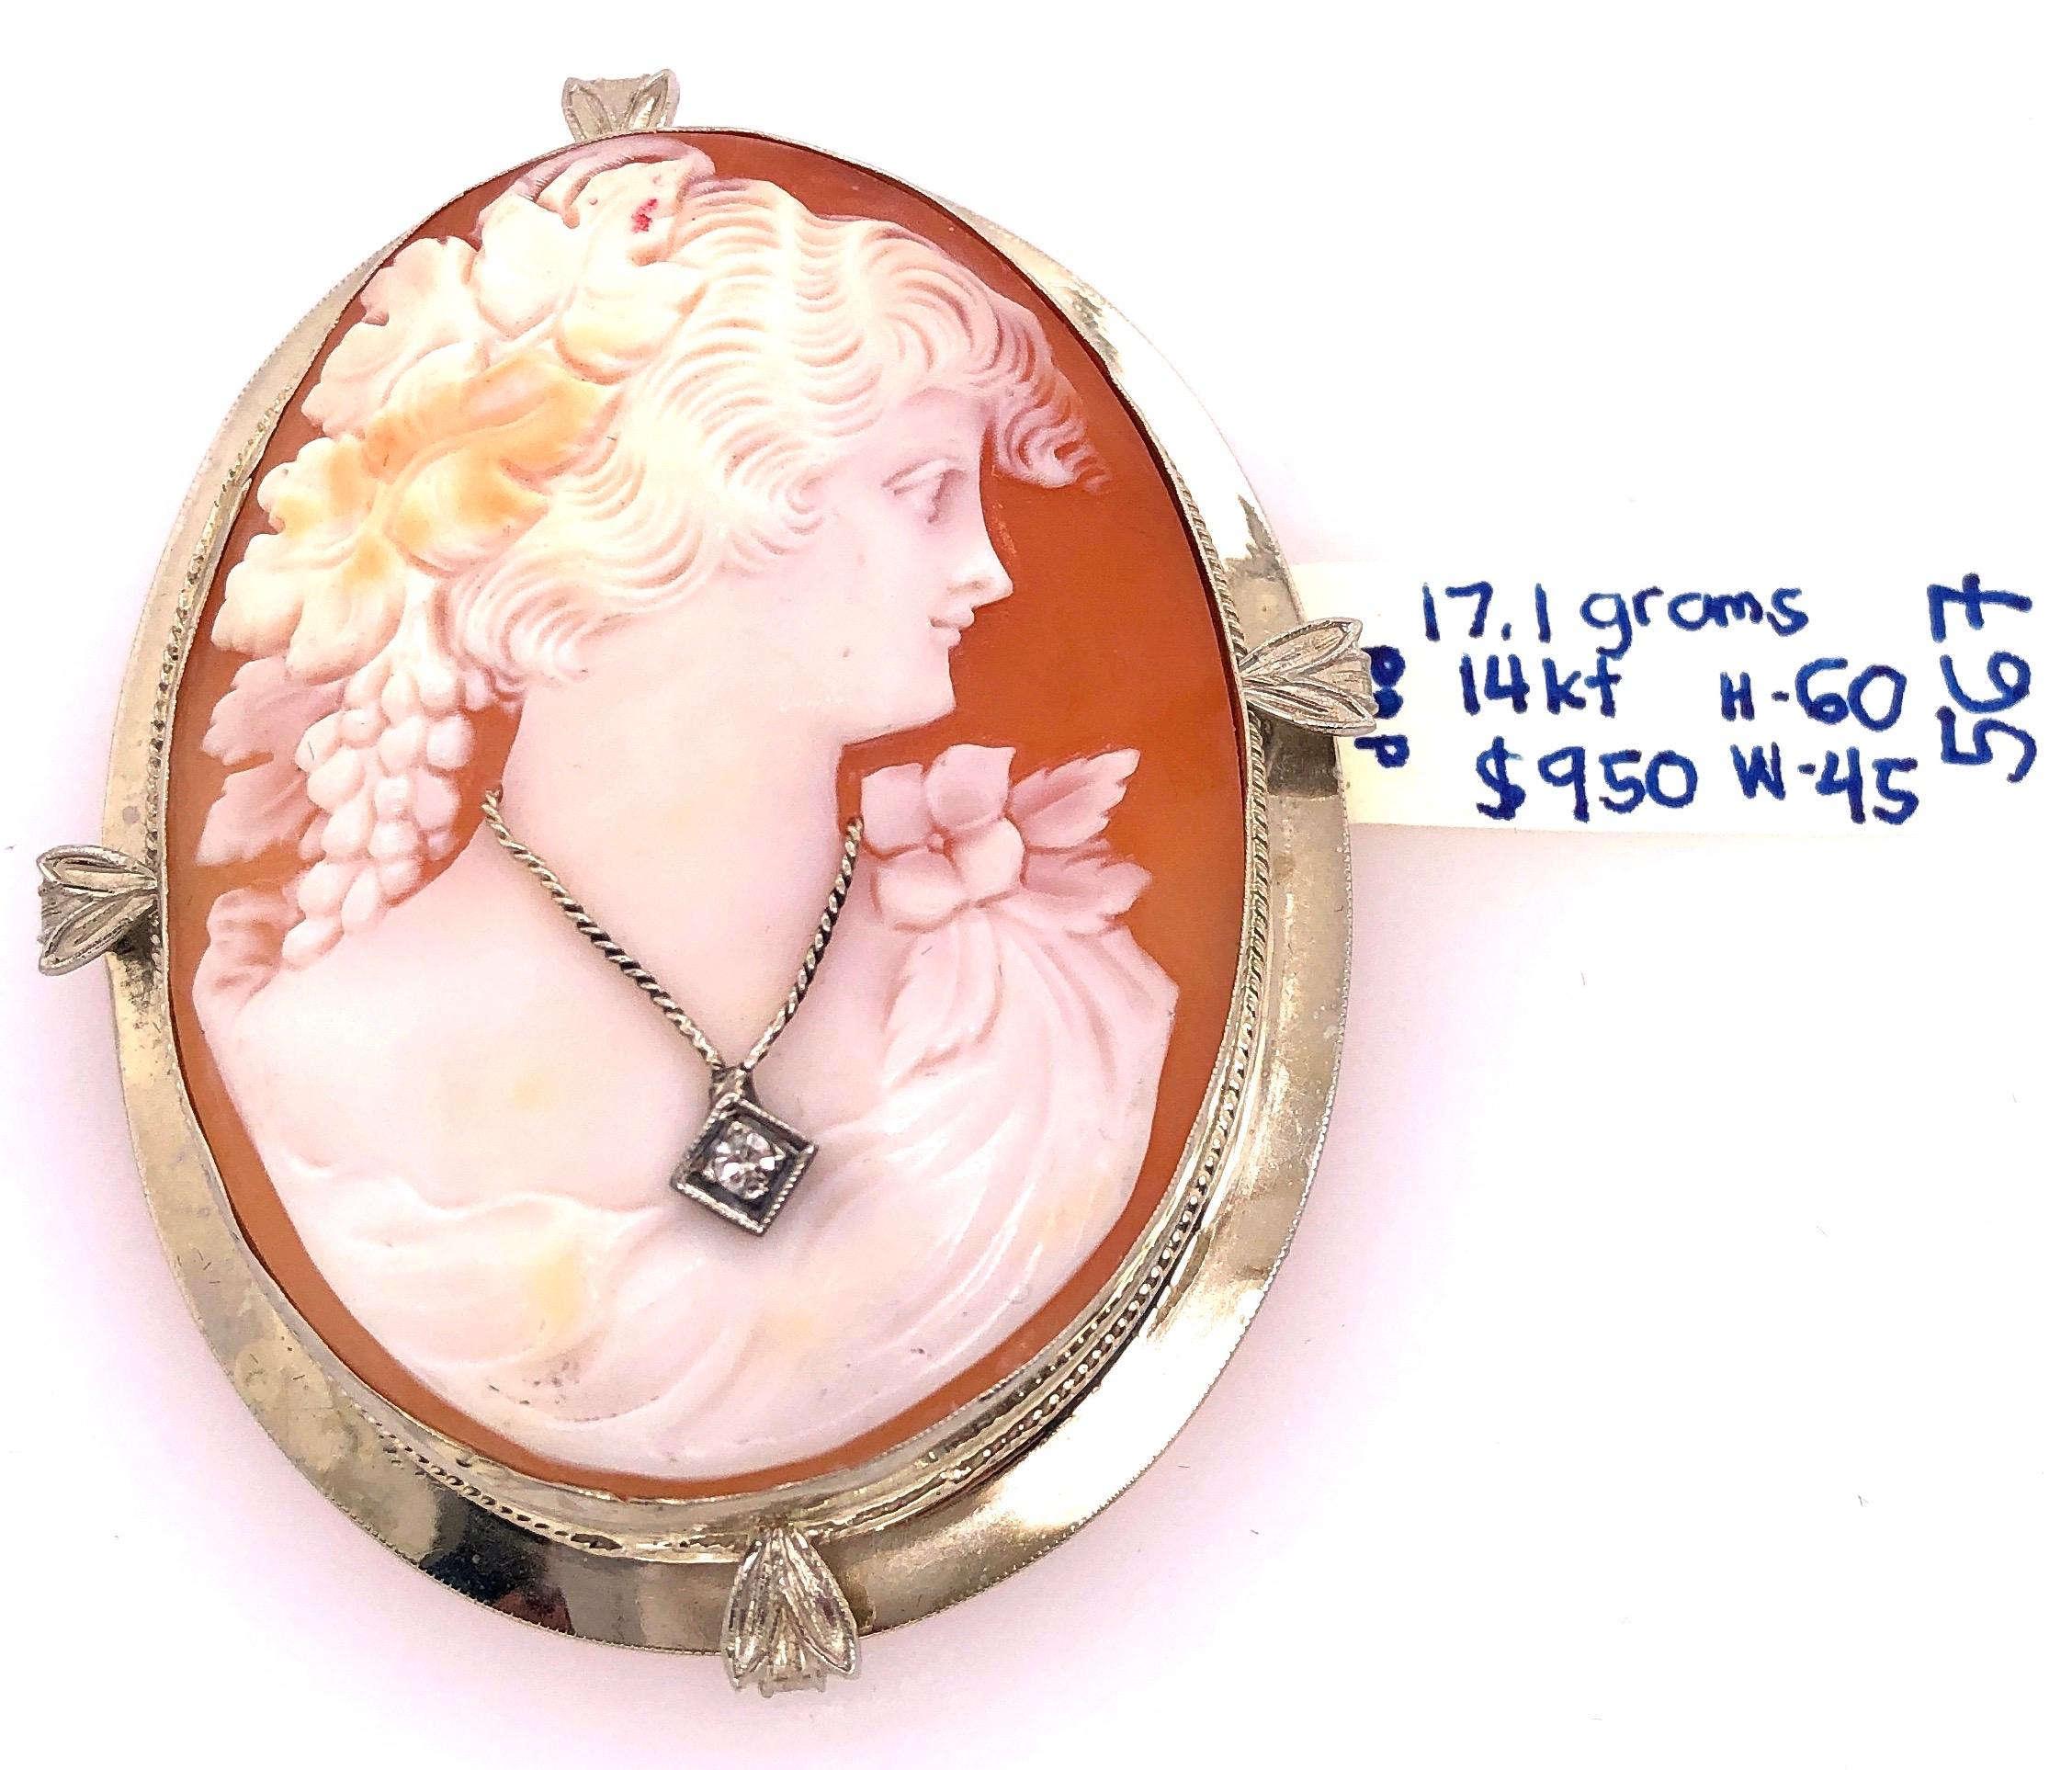 14 Karat White Gold Cameo Brooch and Pendant Woman Profile With Diamond Necklace
17.1 grams total weight.
Height: 60 mm
Width: 45 mm